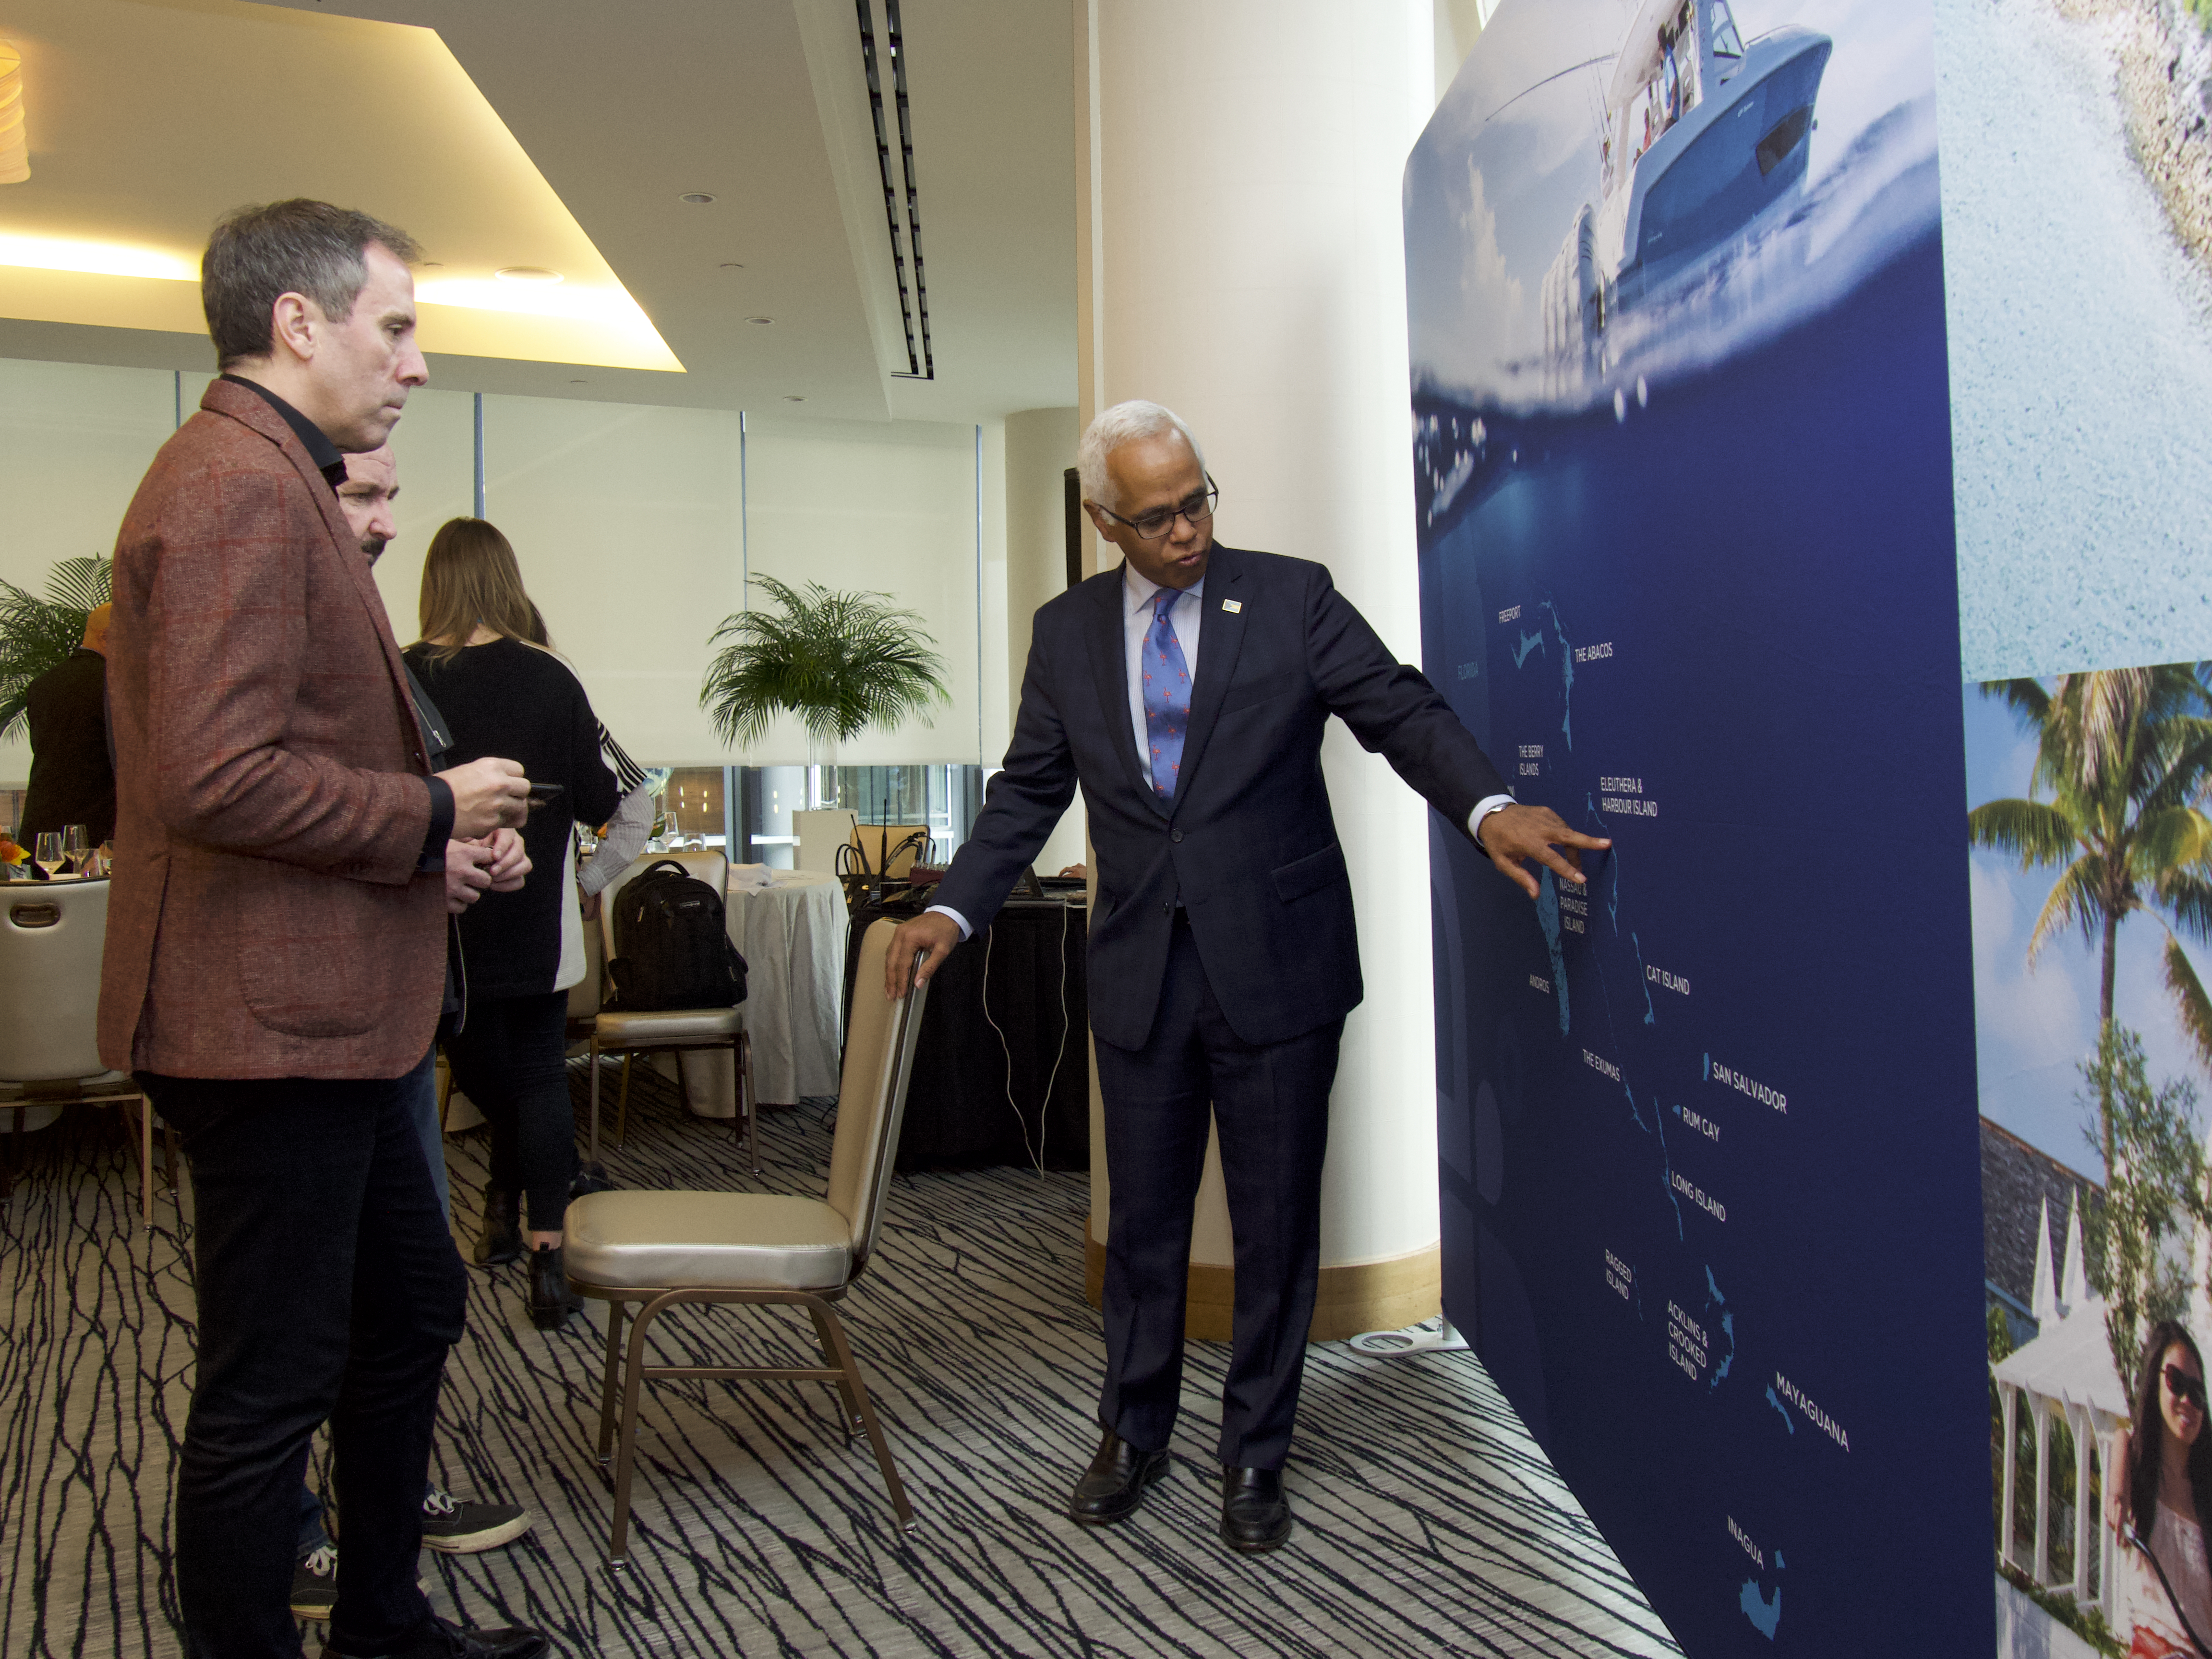 Minister educating media guests on the geography of The Bahamas at Vancouver Media event